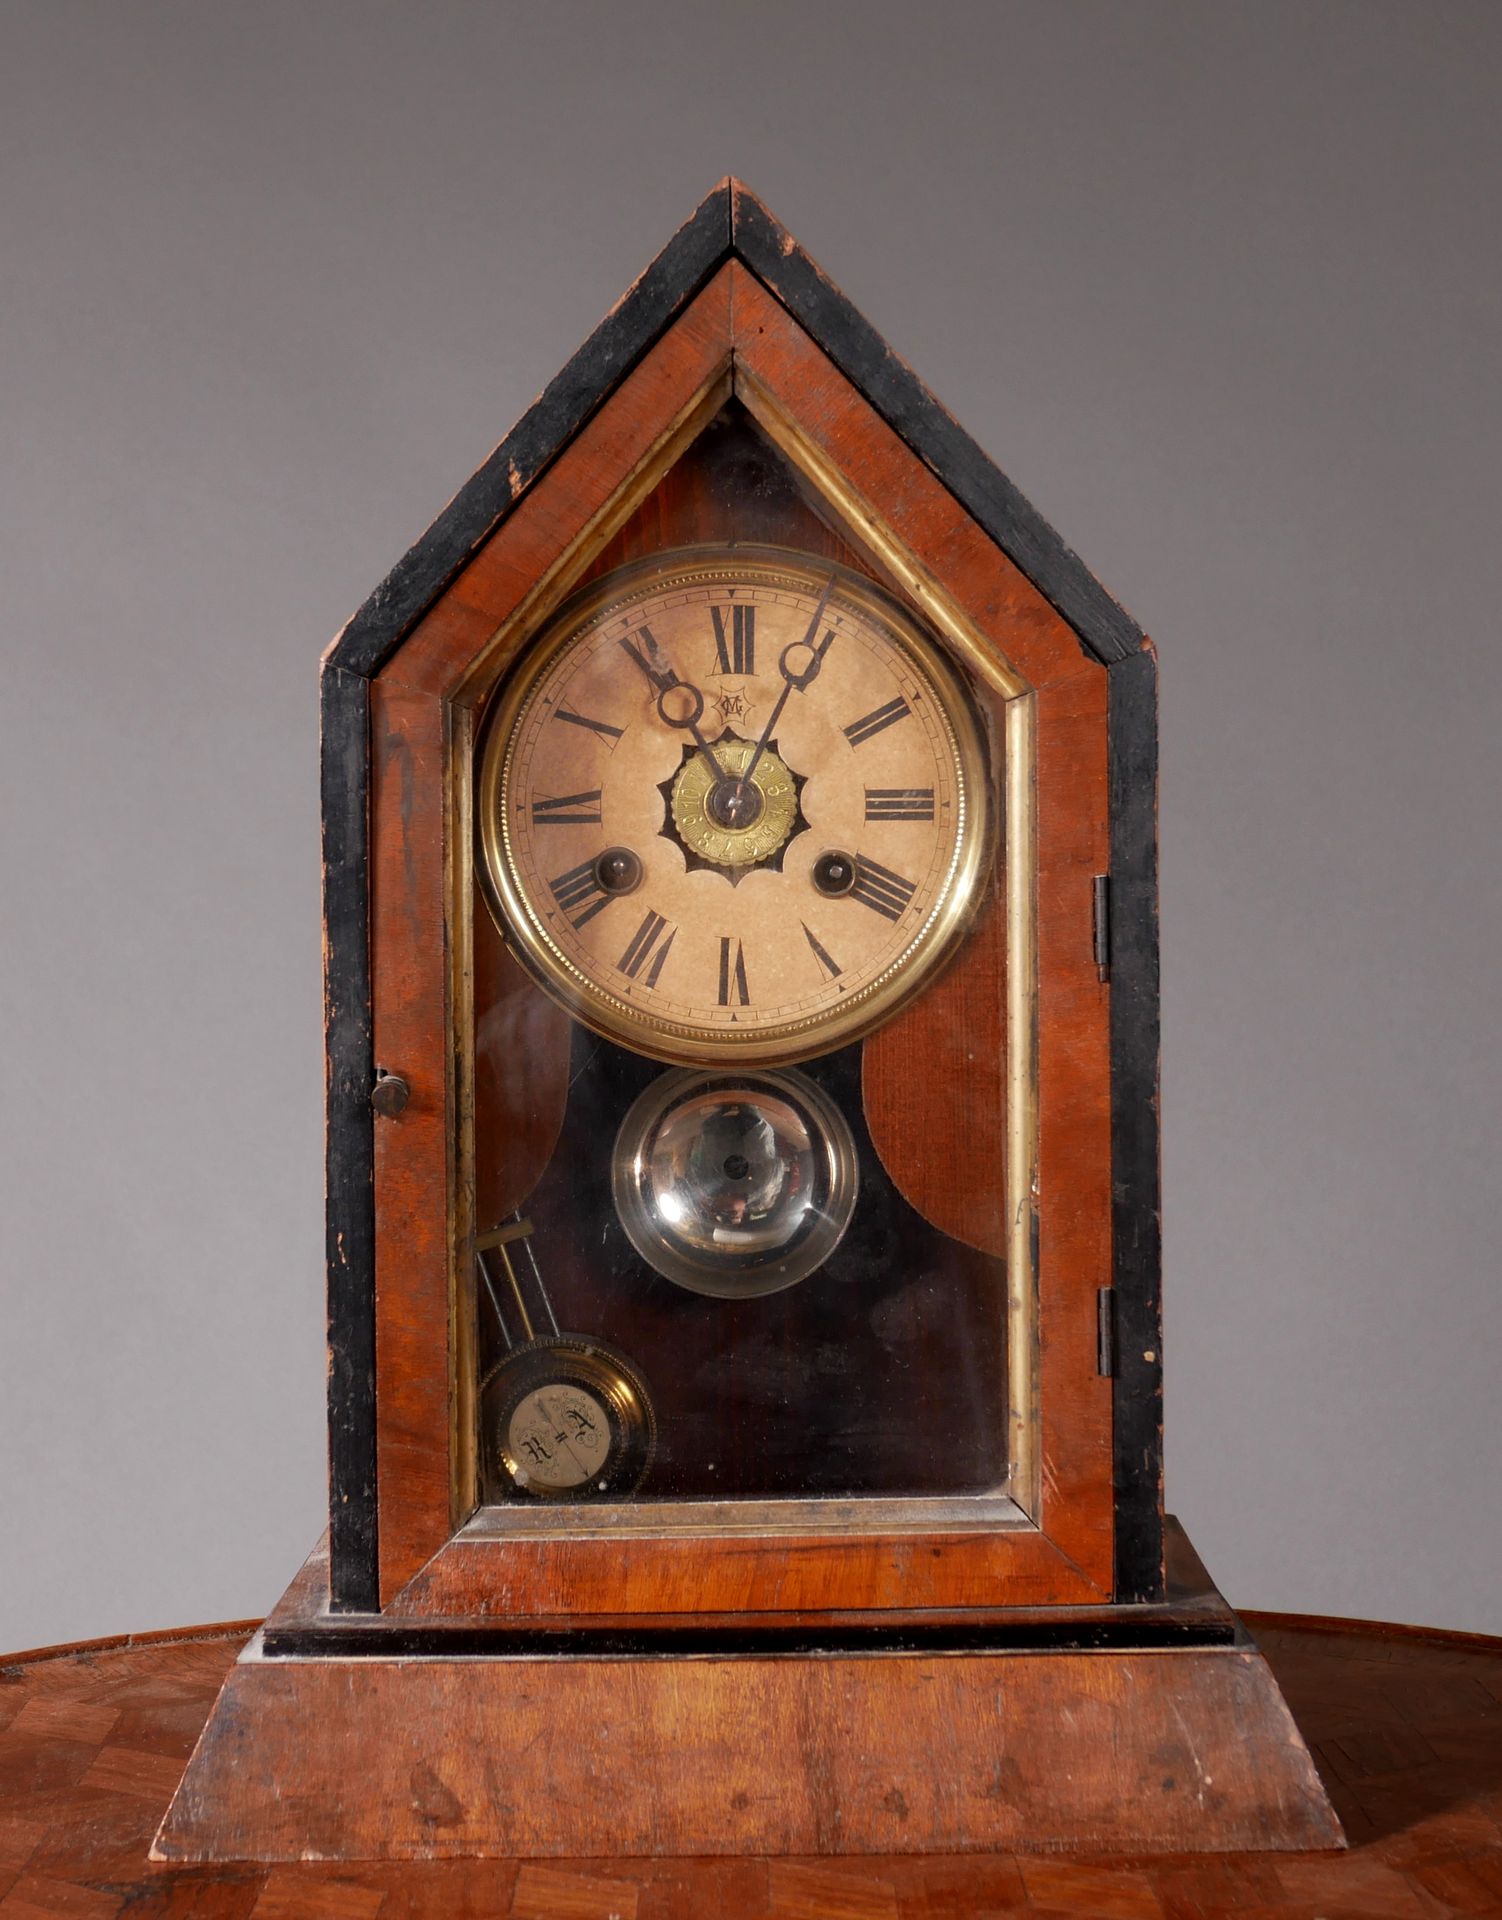 Null Tinted wood clock

H : 36 W : 25 D : 12 cm (wear, accidents, missing)